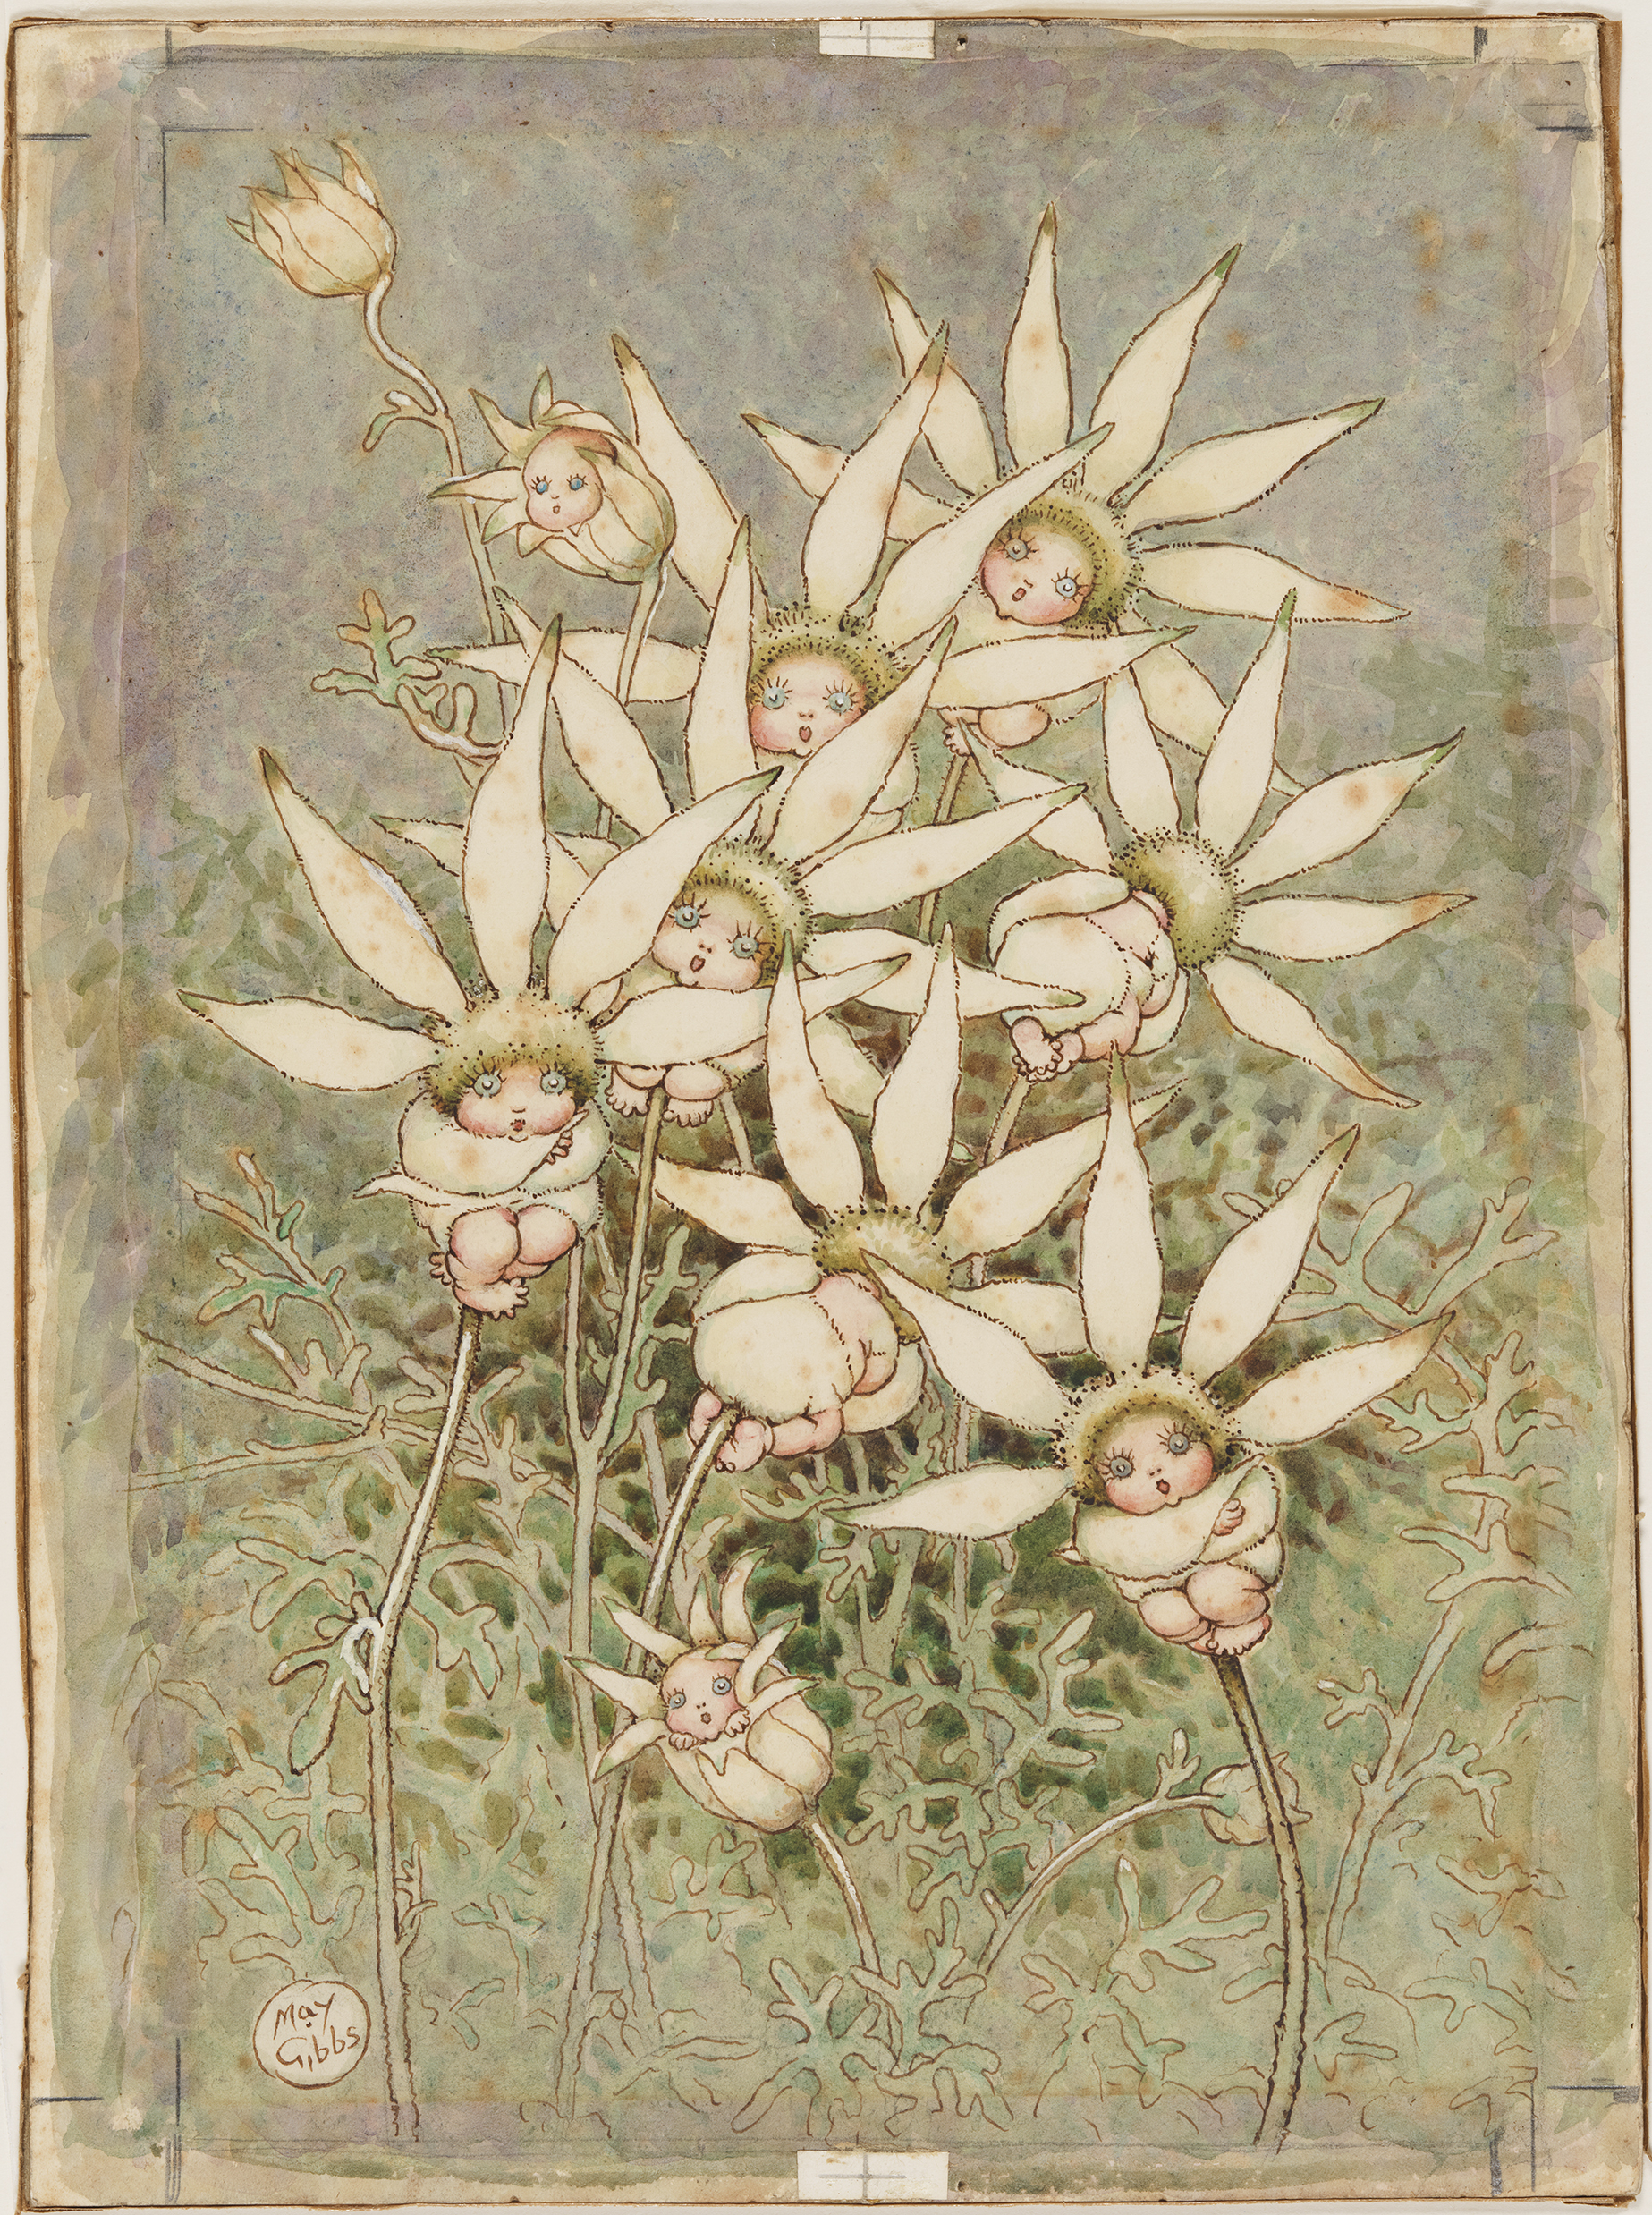 A watercolour painting of little babies with big, blue eyes appearing to grow out of the centre of Flannel flowers